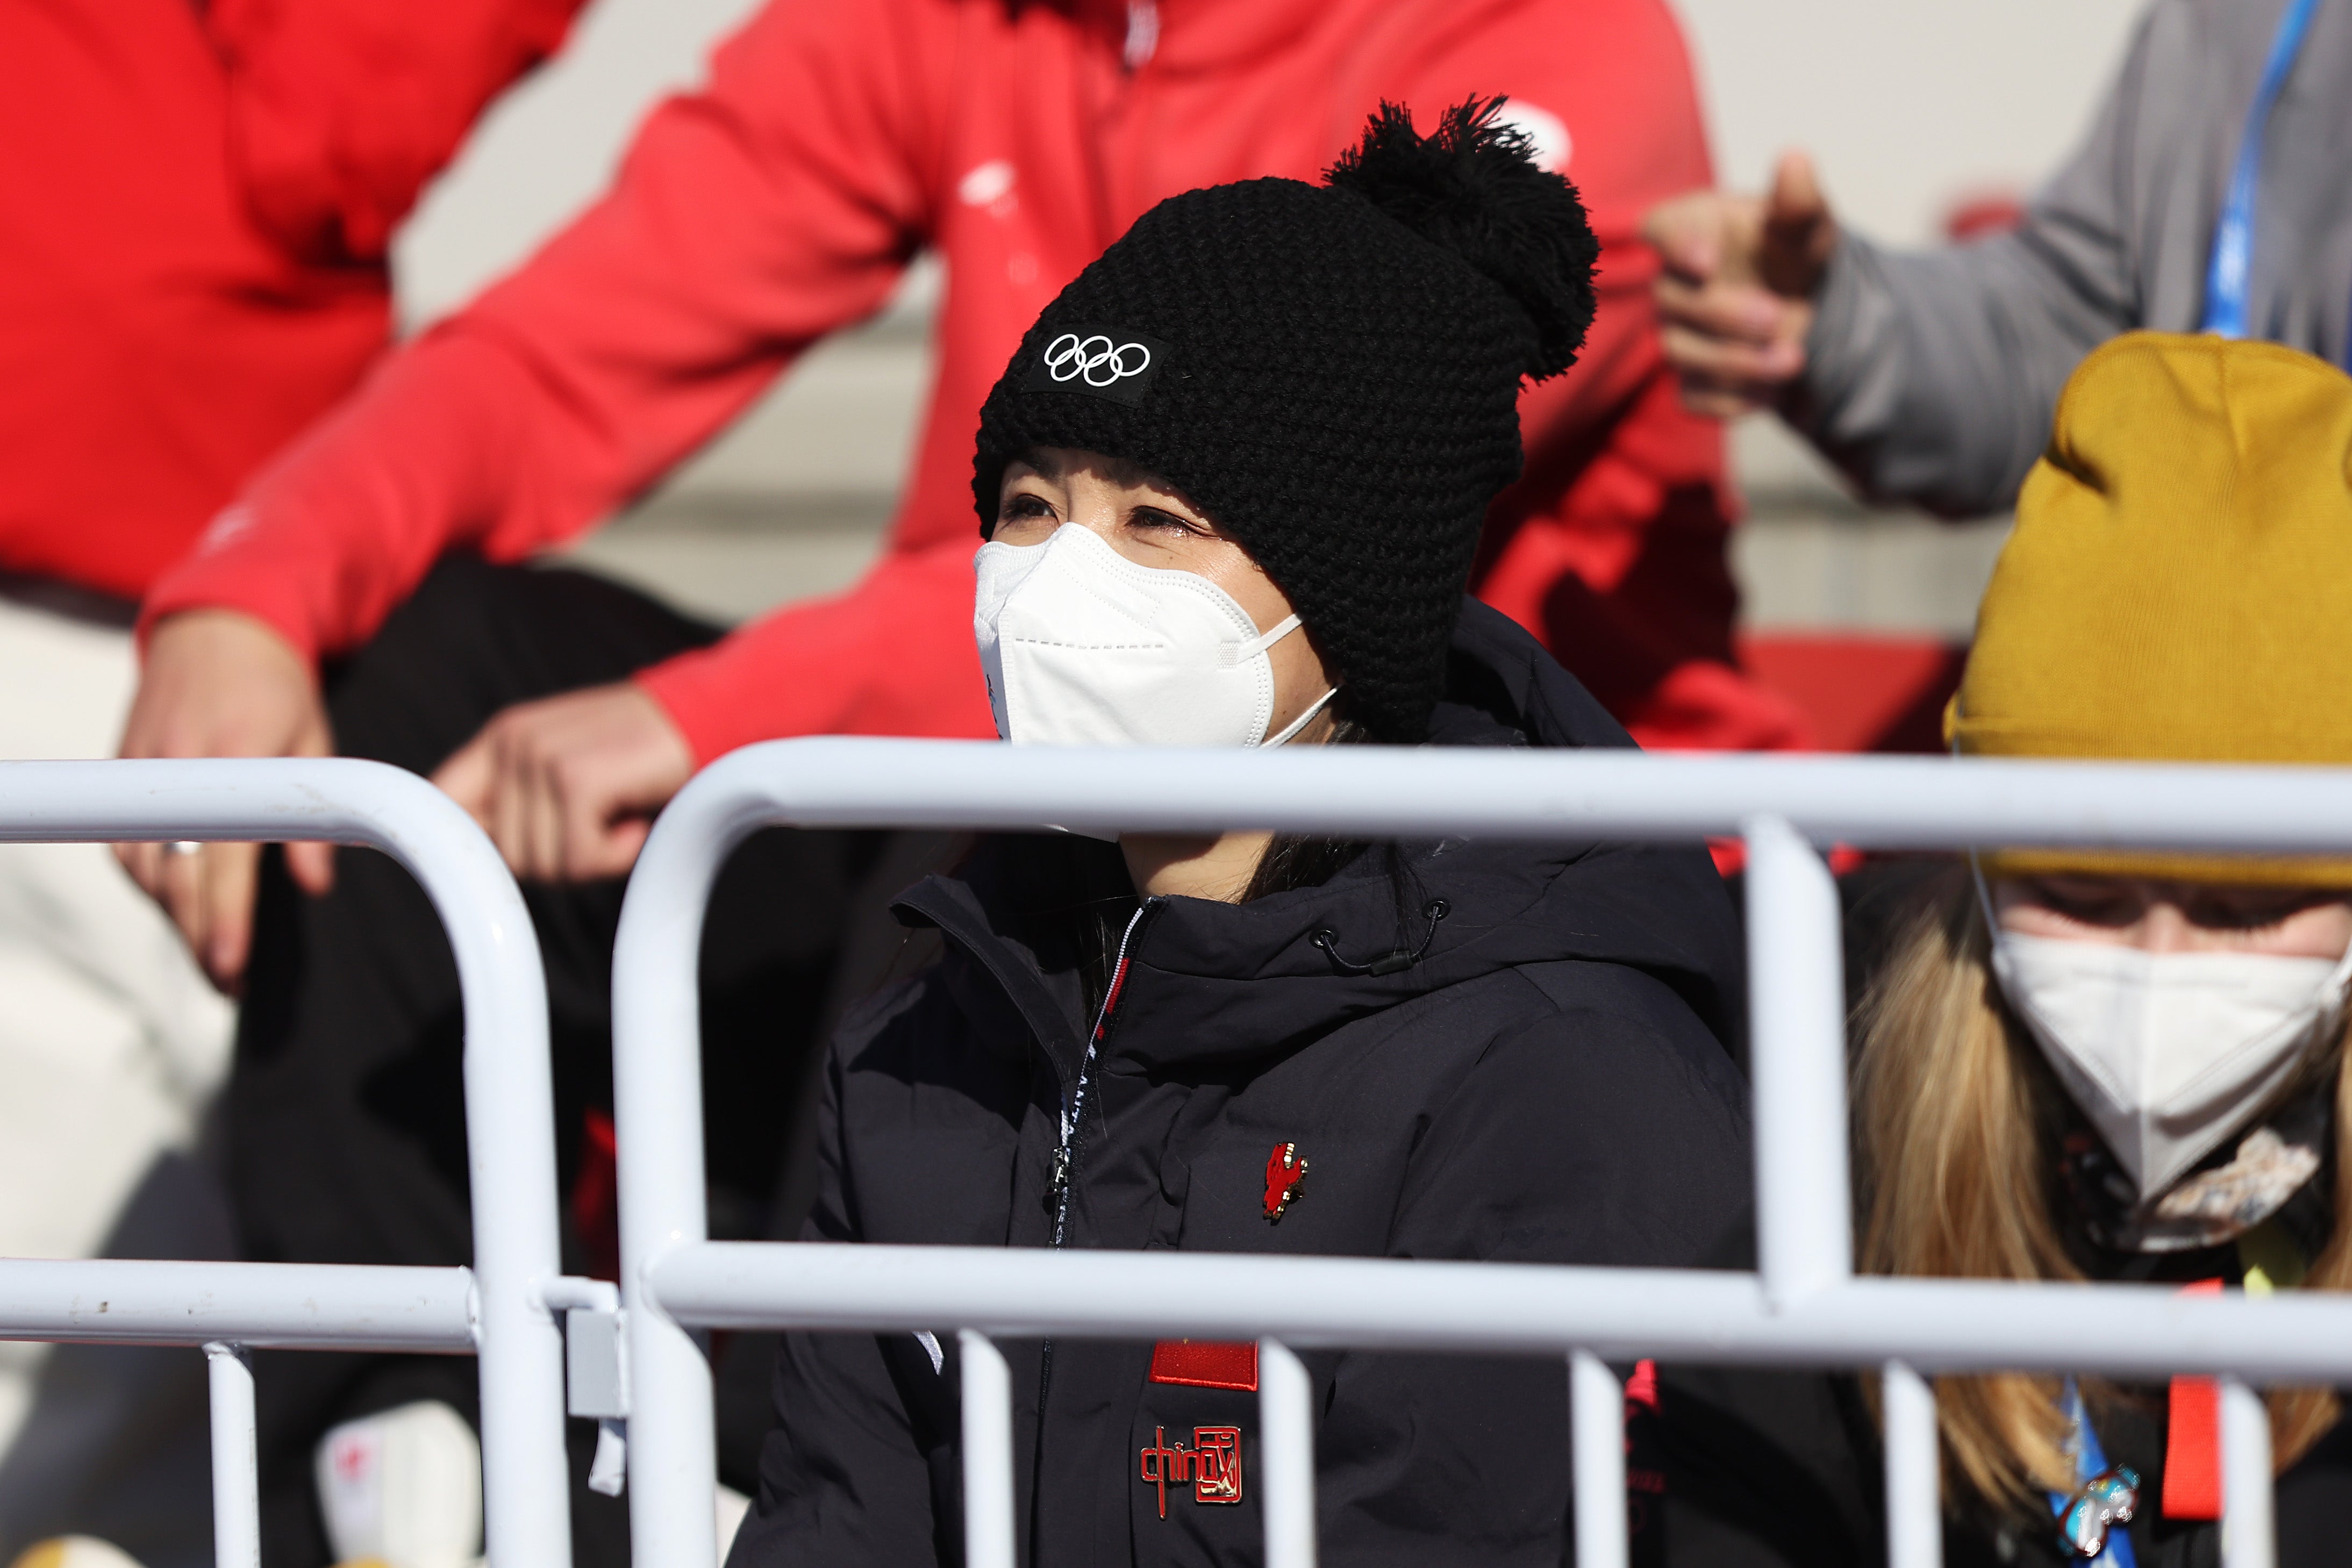 Peng Shuai attended the women’s big air freestyle skiing final on Tuesday